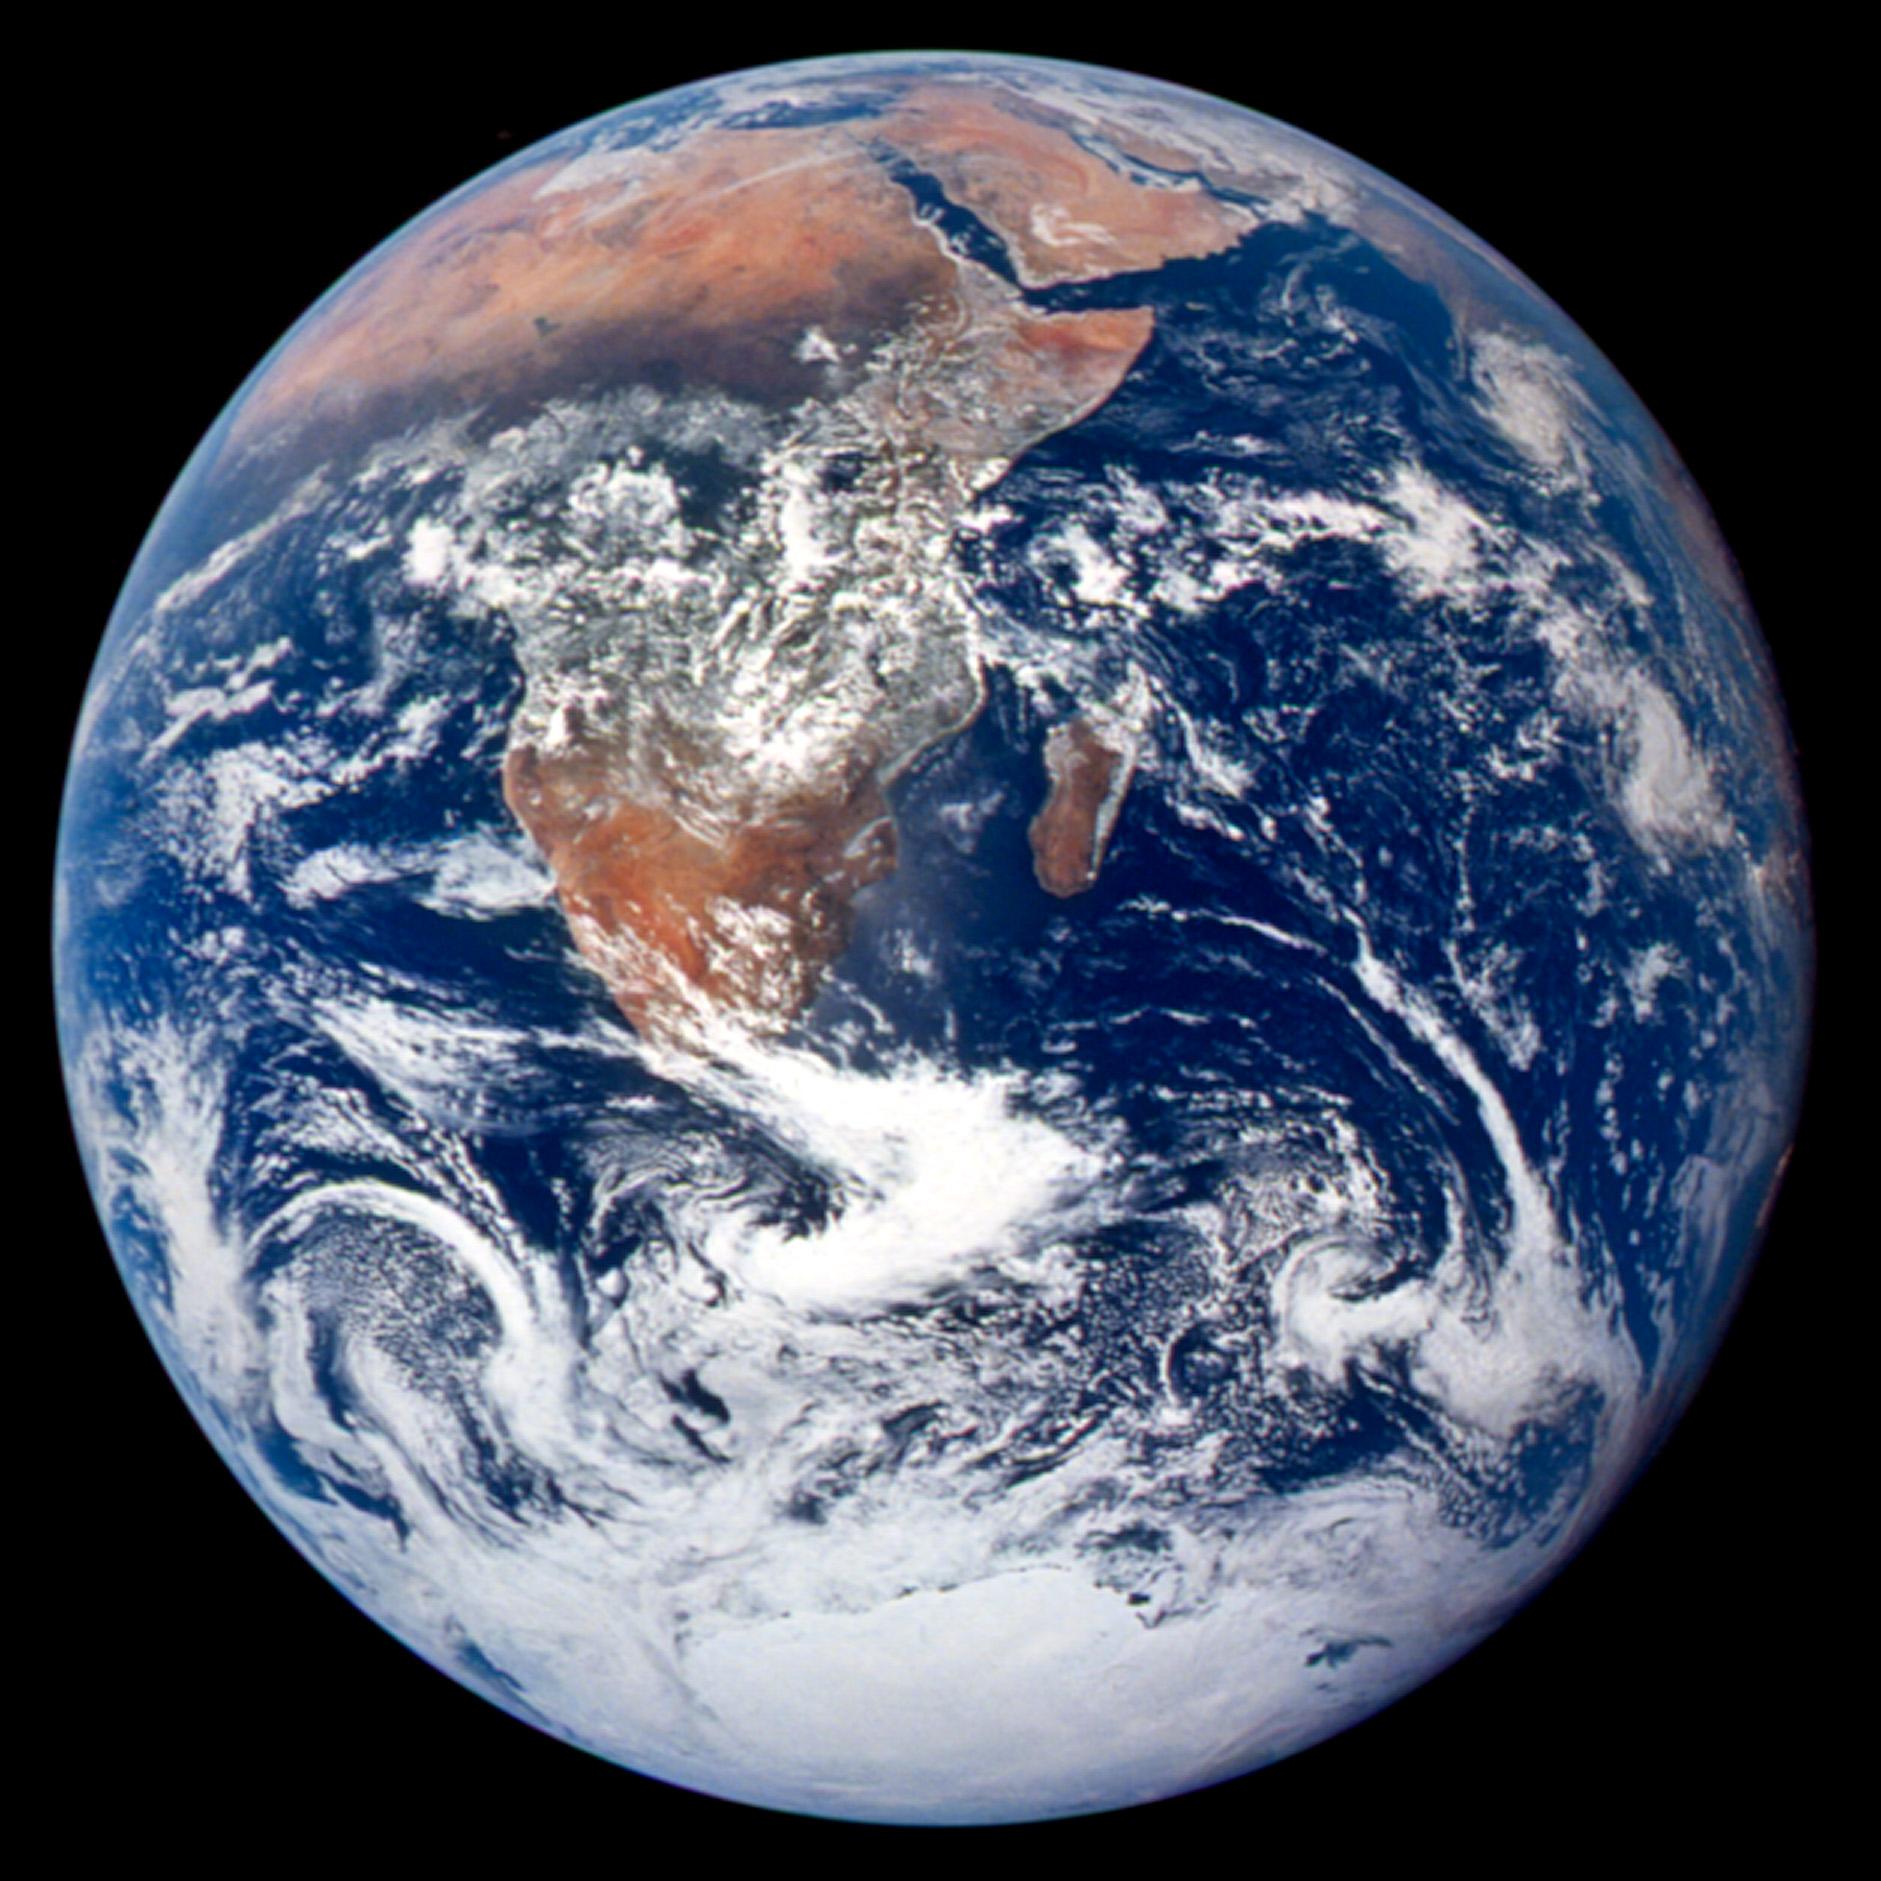 The first picture of the entire planet Earth was captured on the Apollo 17 mission in 1972. Photo credit: NASA